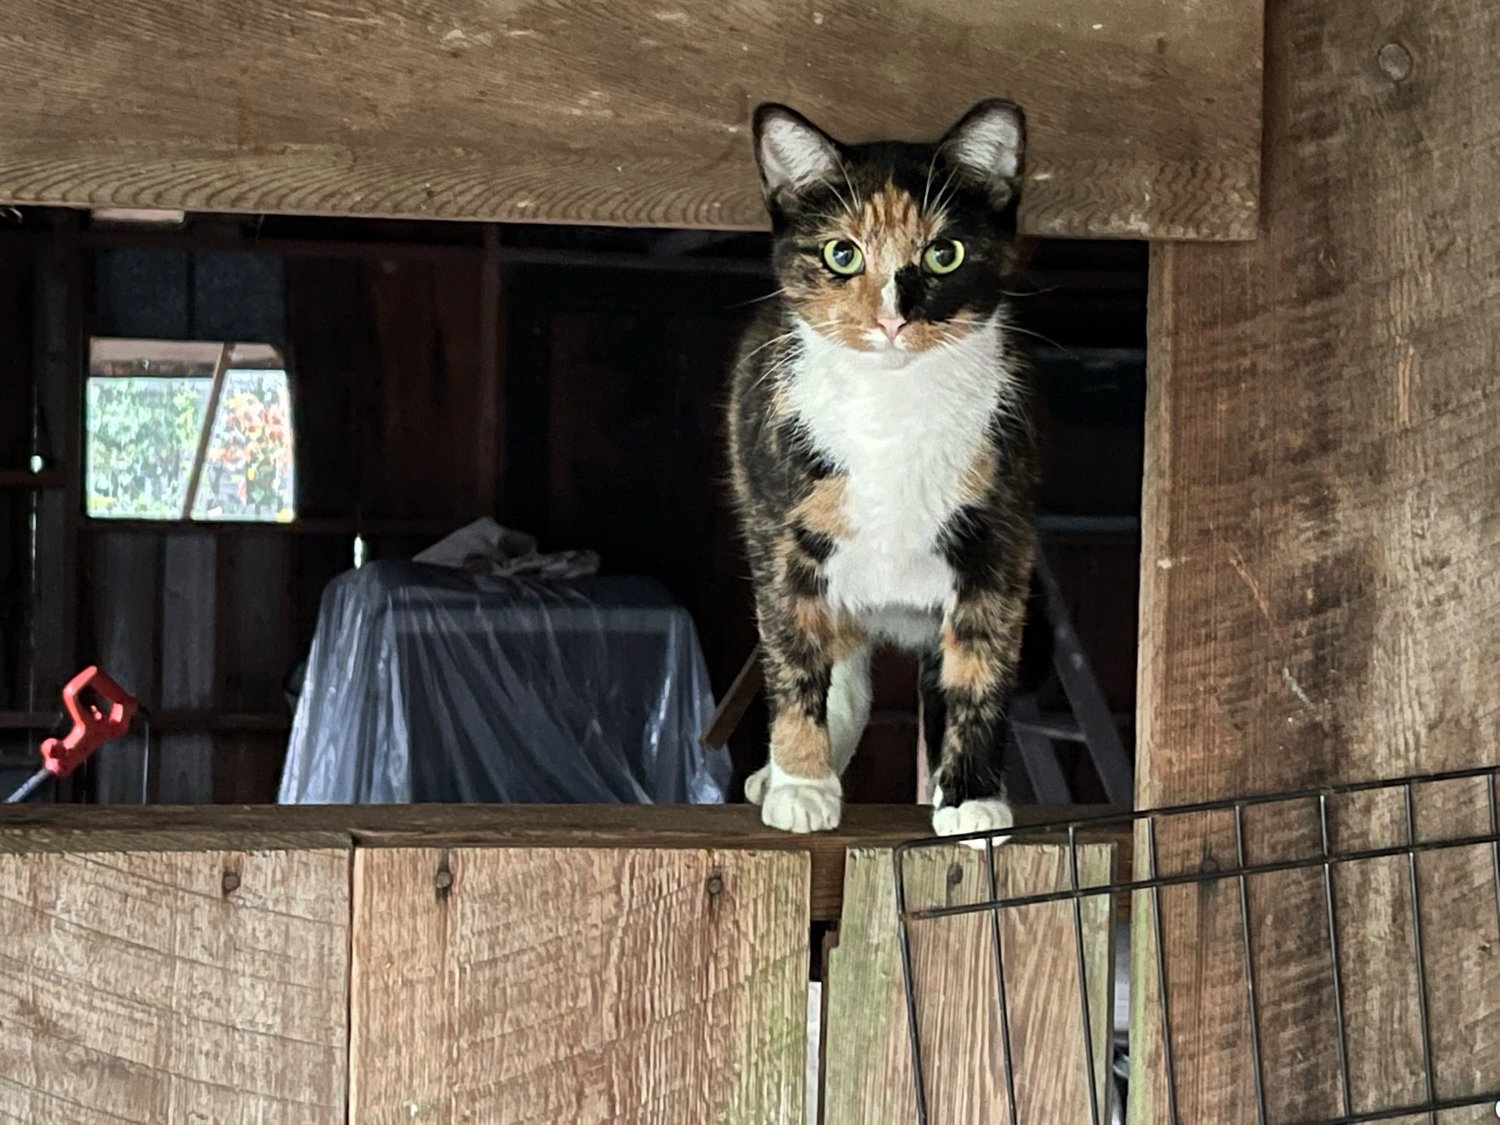 Purradise Springs offers community cats a place to call home.